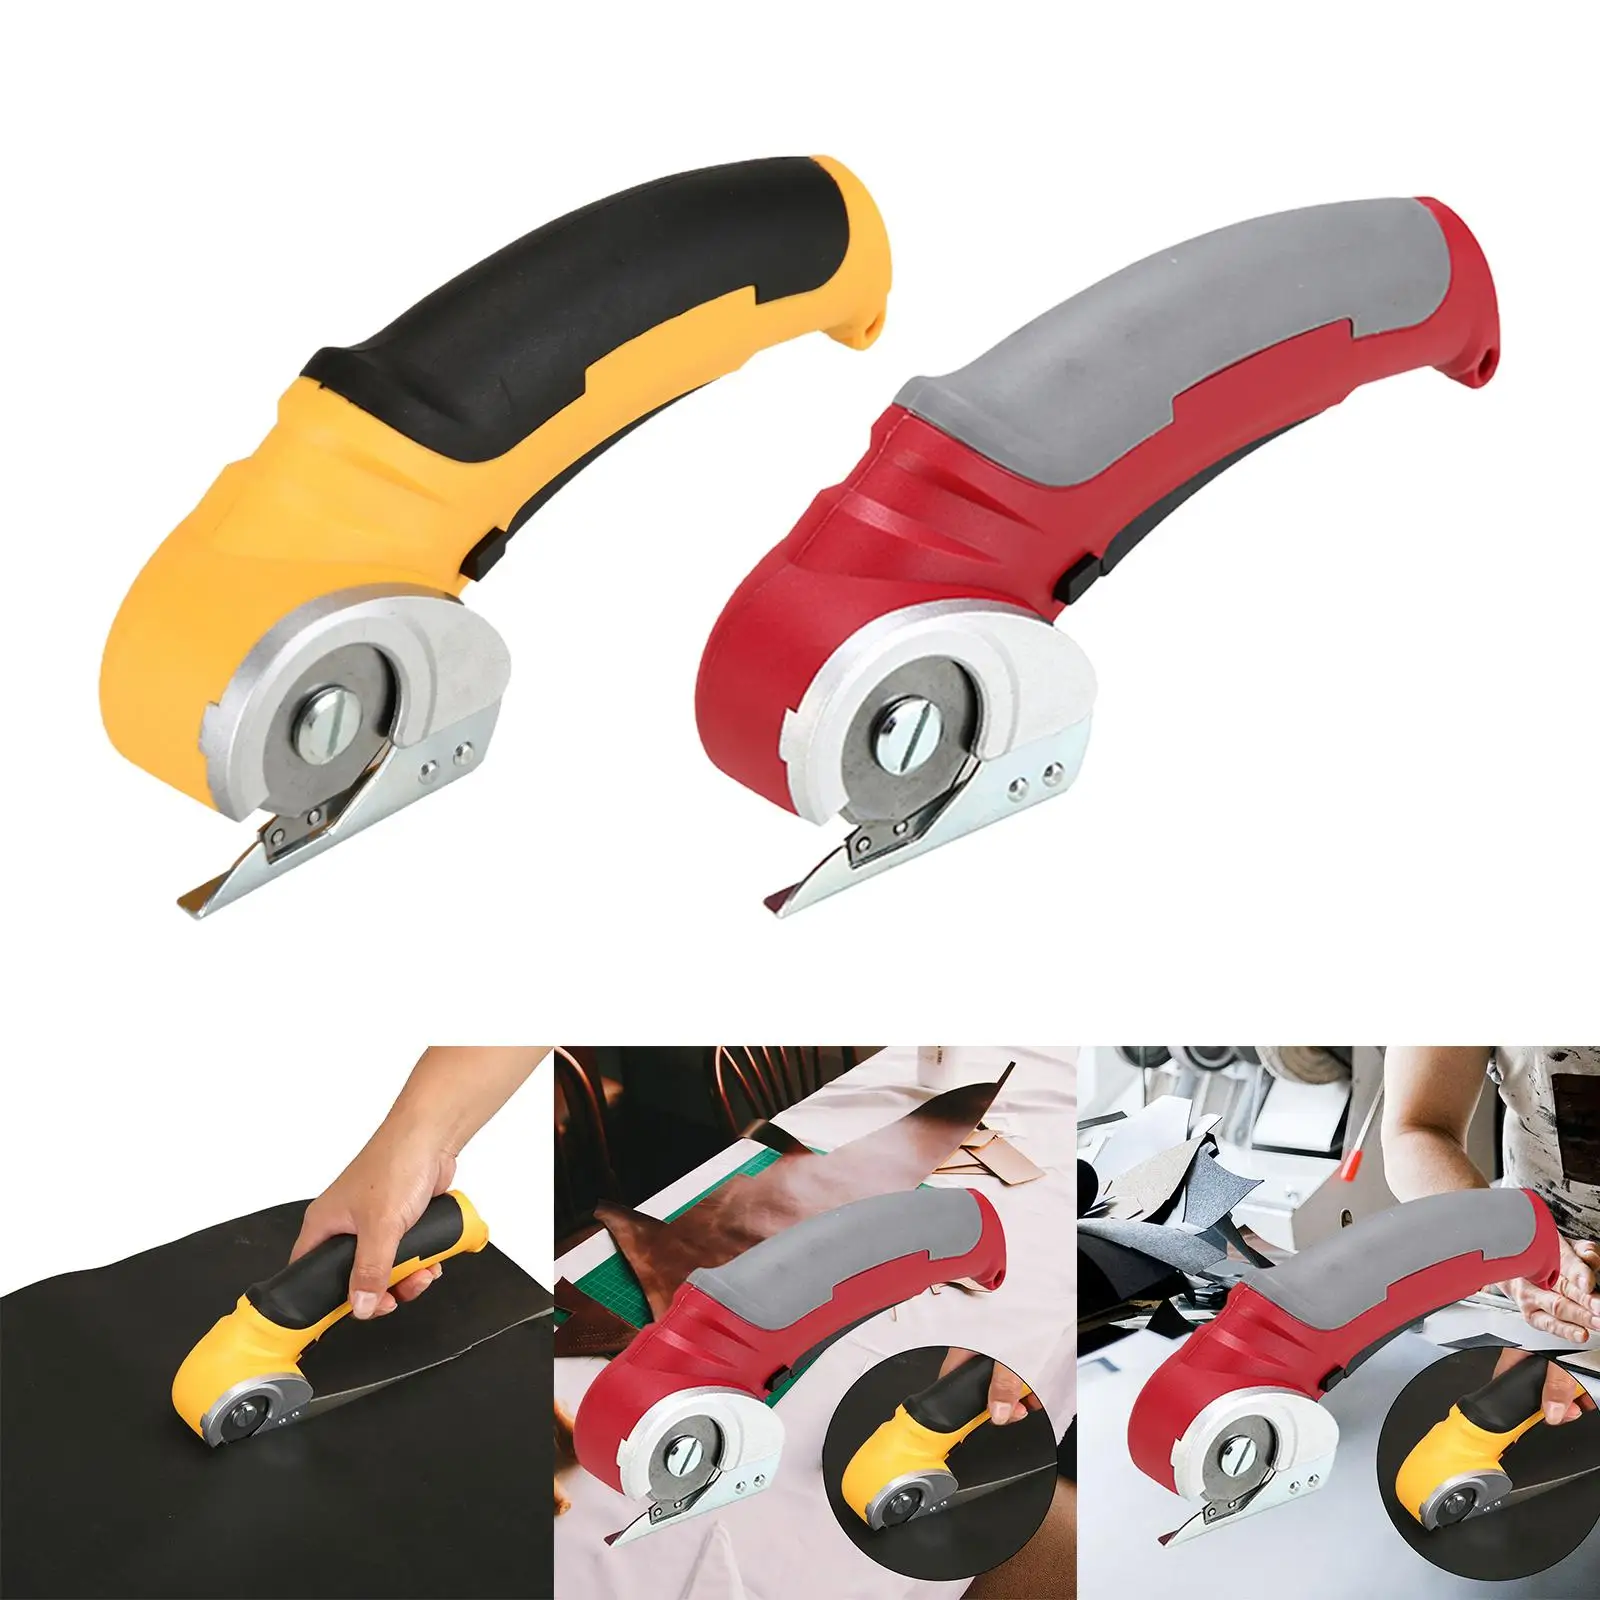 Cordless Electric Scissors Cutter USB Charging Small Tools Accessories Shear Leather Rug Cutting Fabric